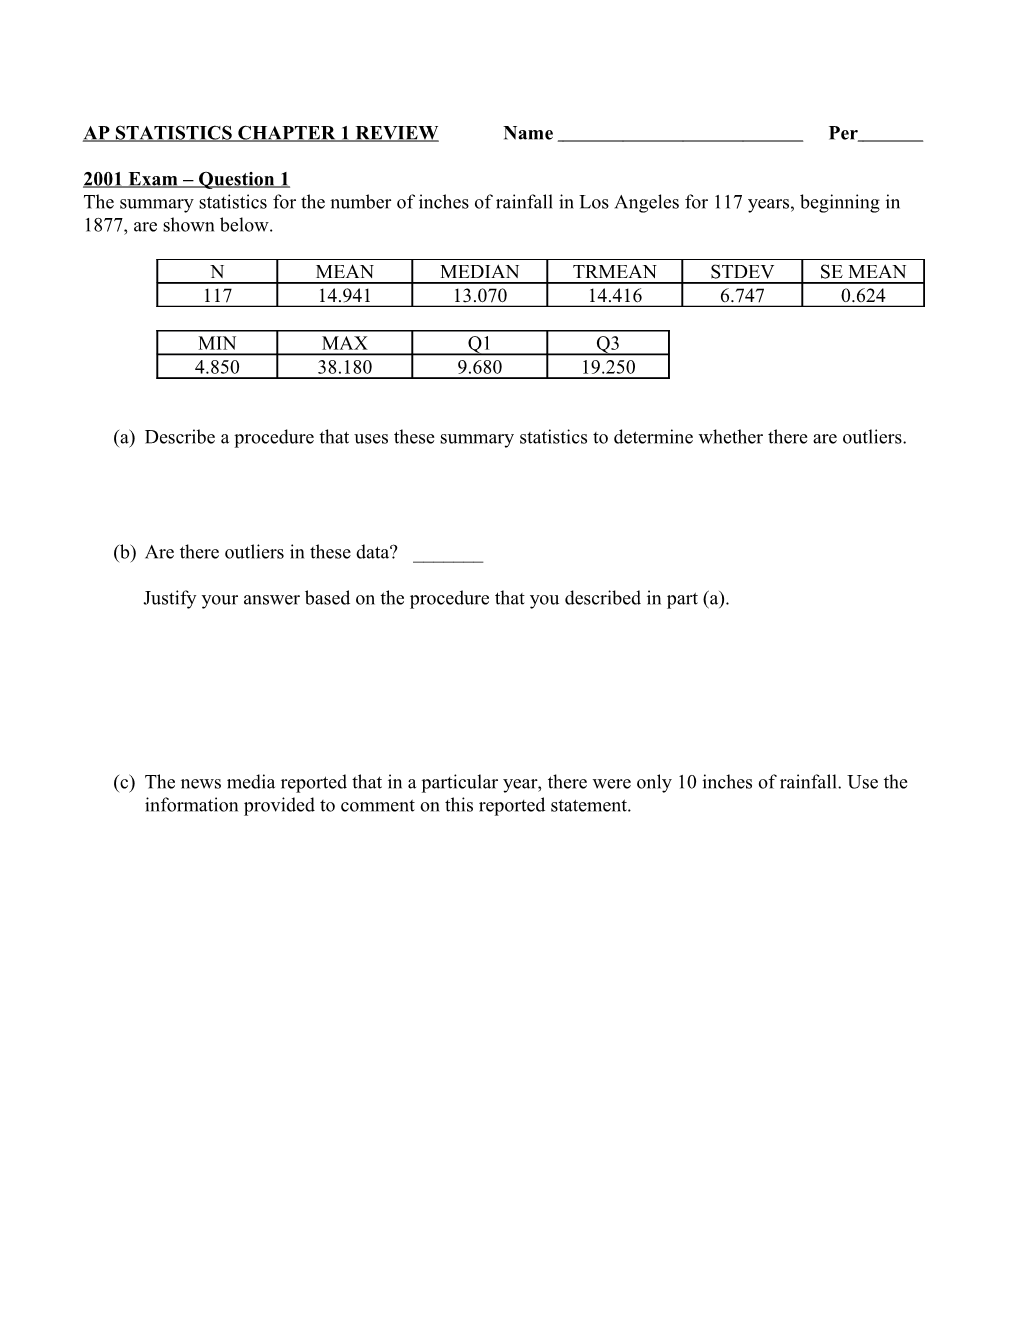 AP STATISTICS CHAPTER 1 REVIEW Name Per 2001 Exam Question 1